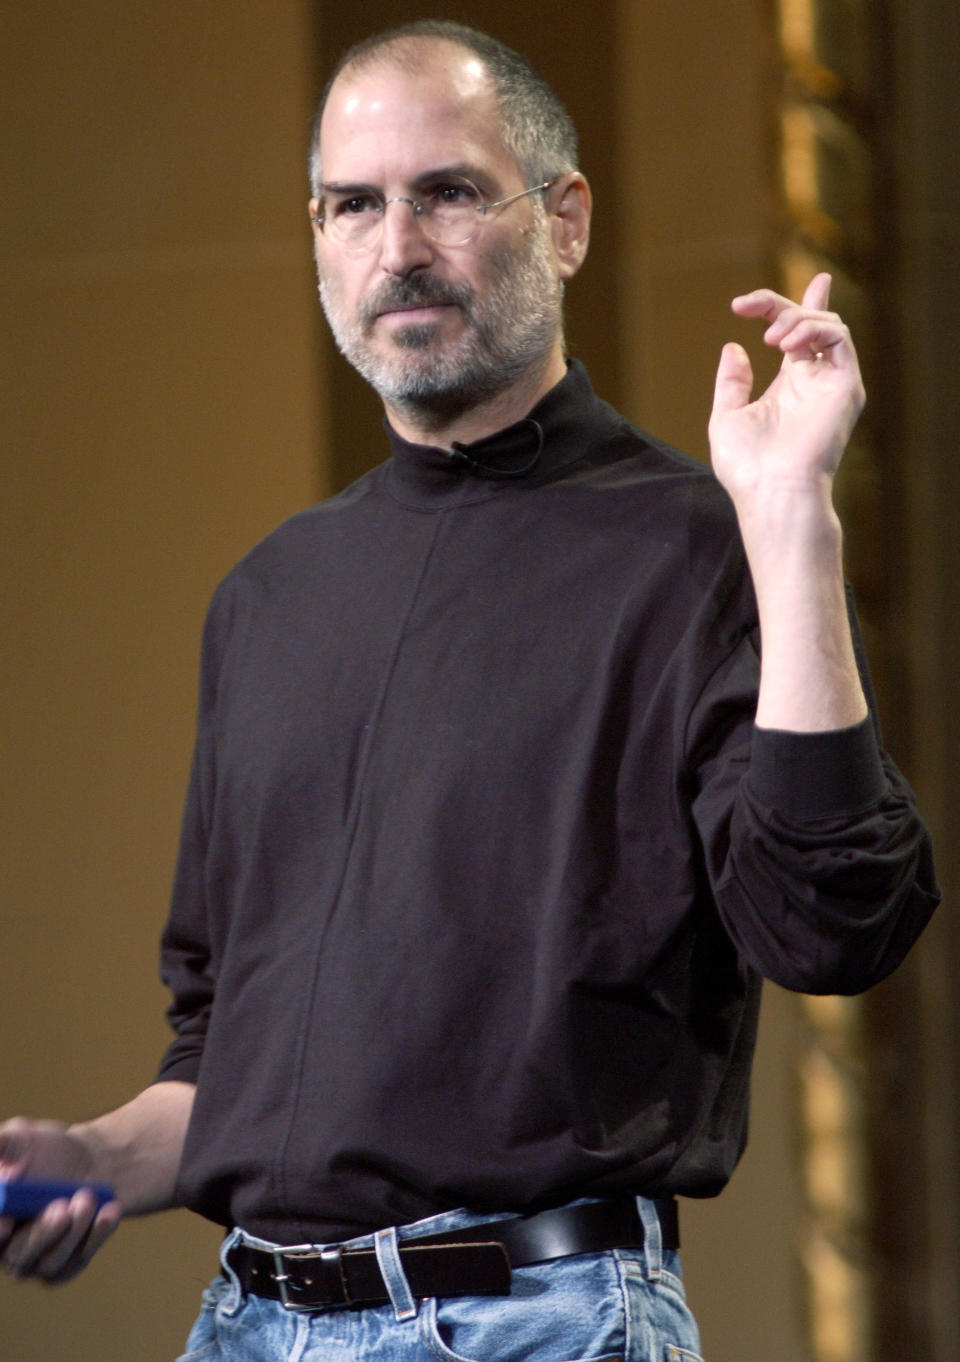 Steve Jobs shows off his uniform during a presentation. - Credit: Getty